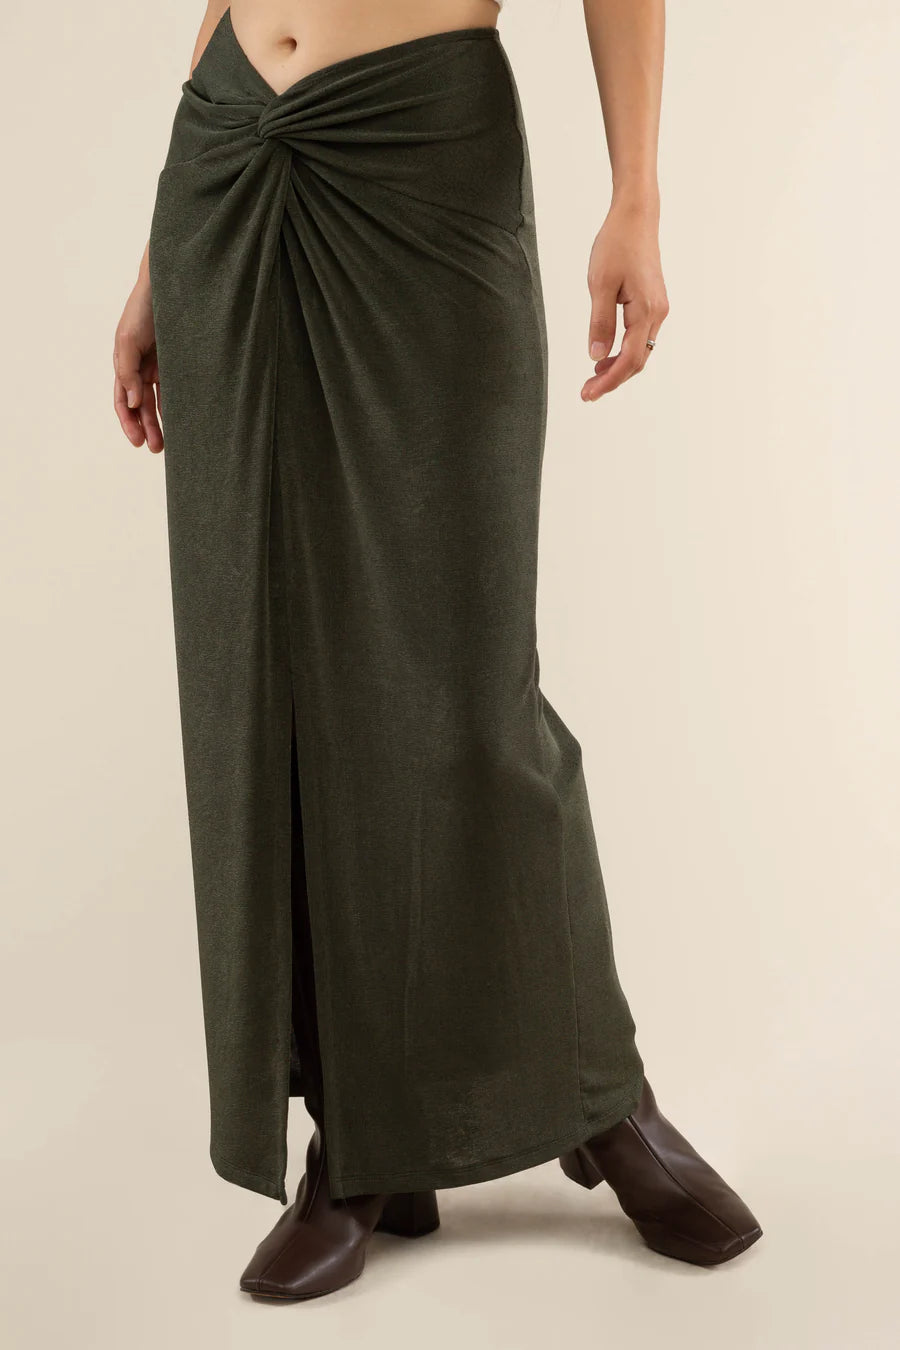 Slinky Gaia Front Twist Skirt skirt No Less Than Small Olive 